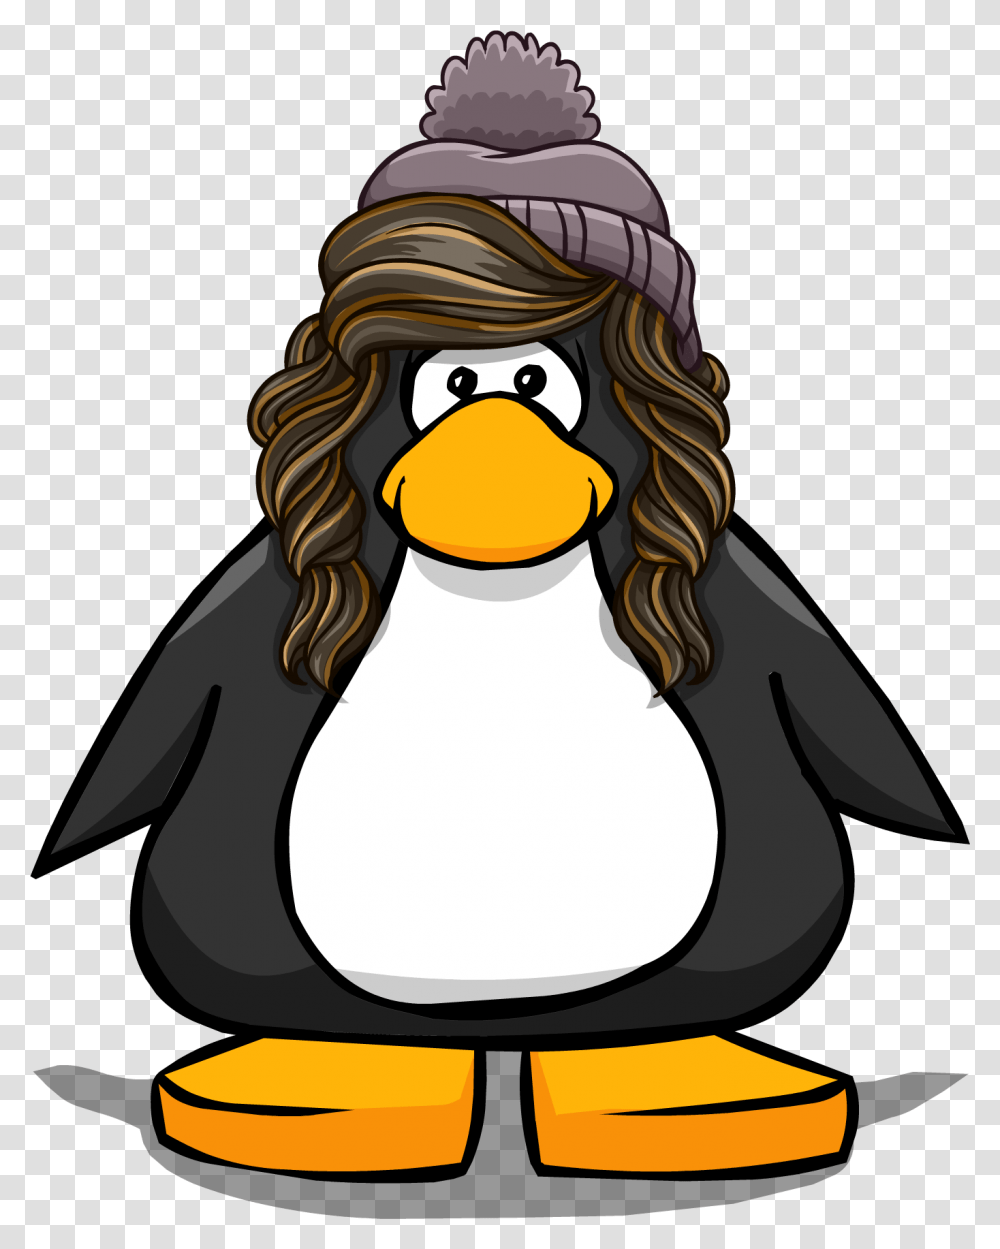 The Snow Day From A Player Card Penguin With A Top Hat, Bird, Animal, King Penguin Transparent Png